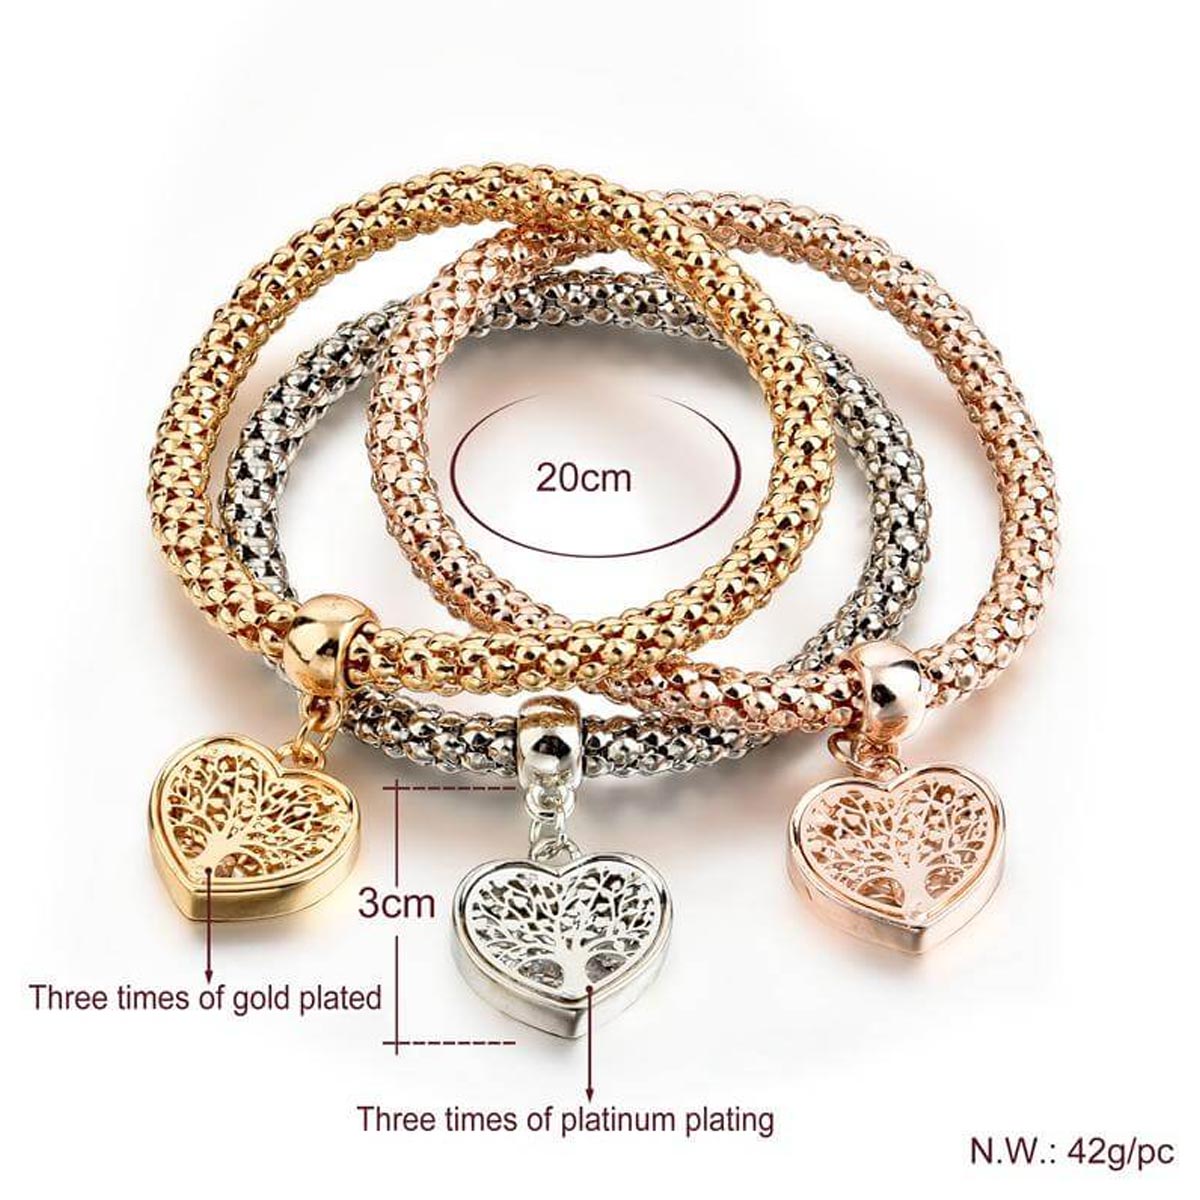 BUY 1, GET 2 FREE Tree of Life Heart Edition Charm Bracelet with Real Austrian Crystals